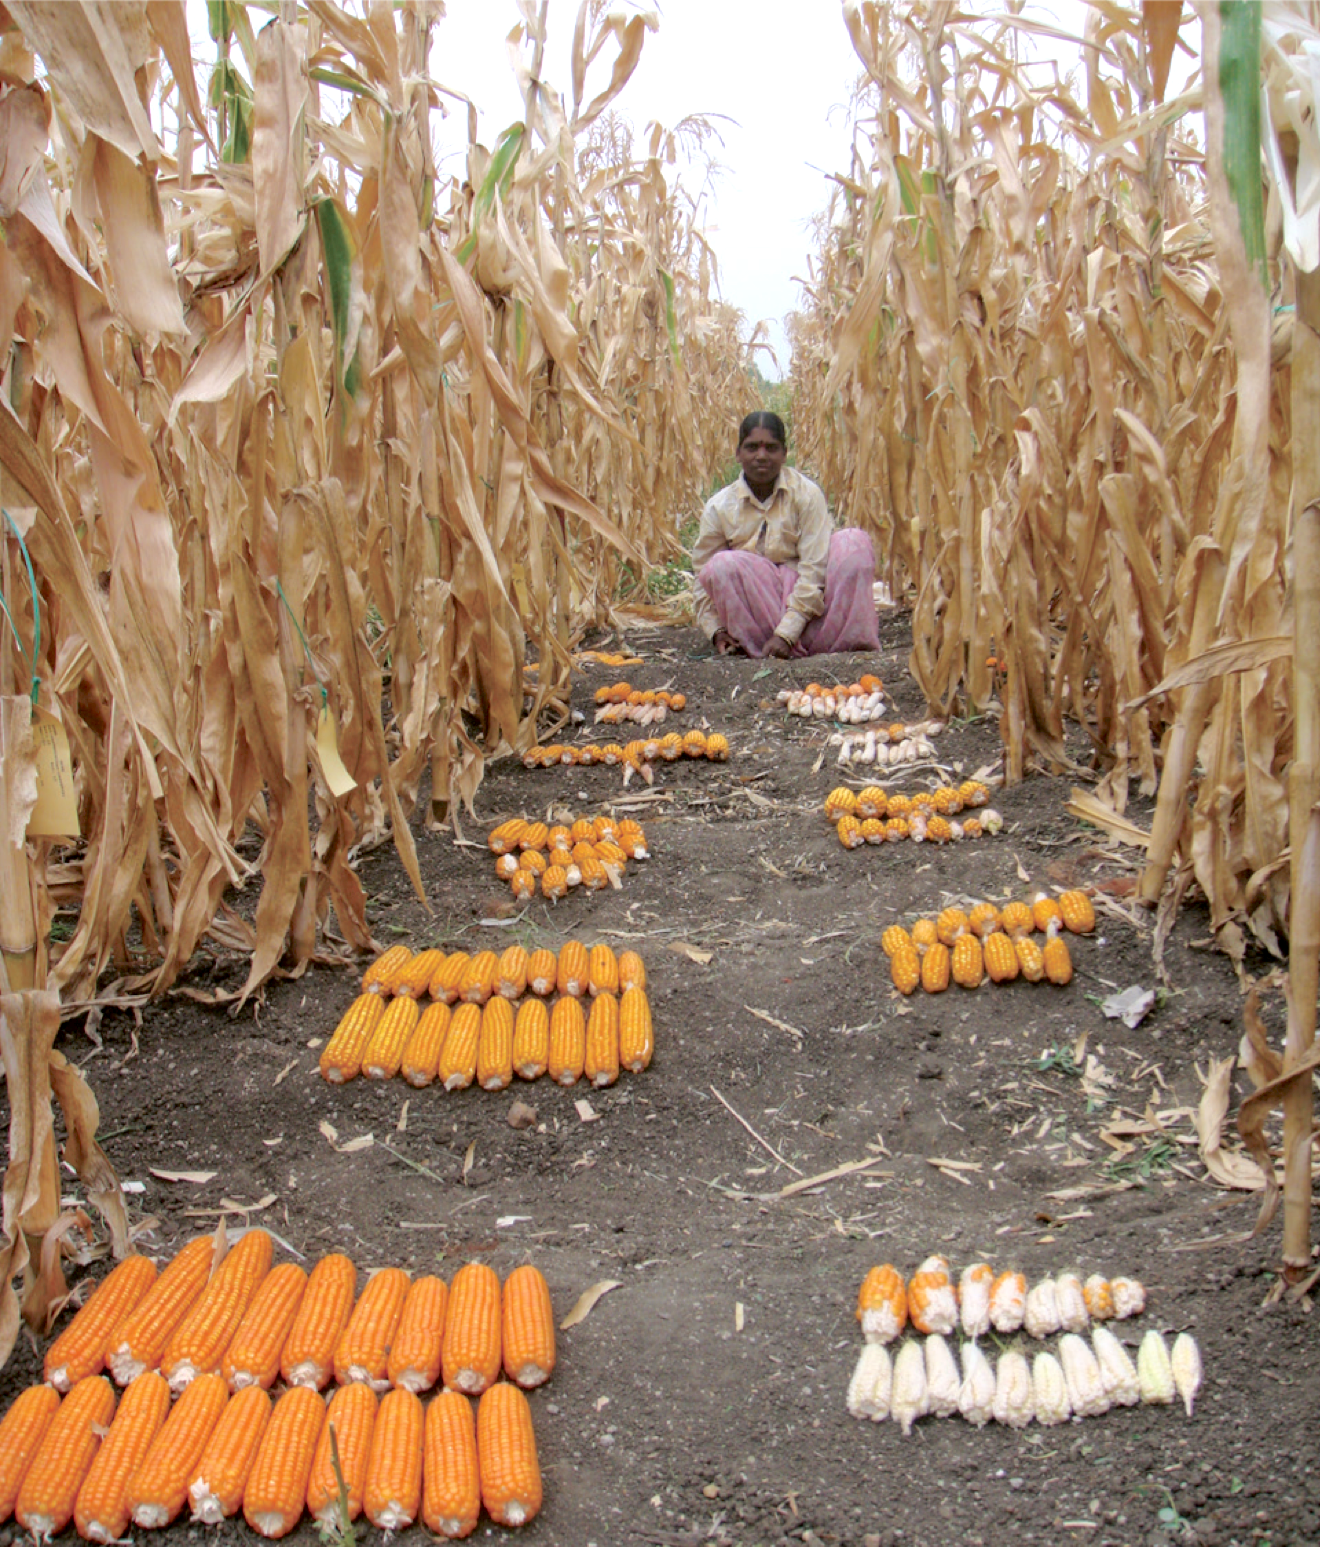 Variability among maize genotypes for agronomic and yield traits under managed drought stress. (Photo: CIMMYT)